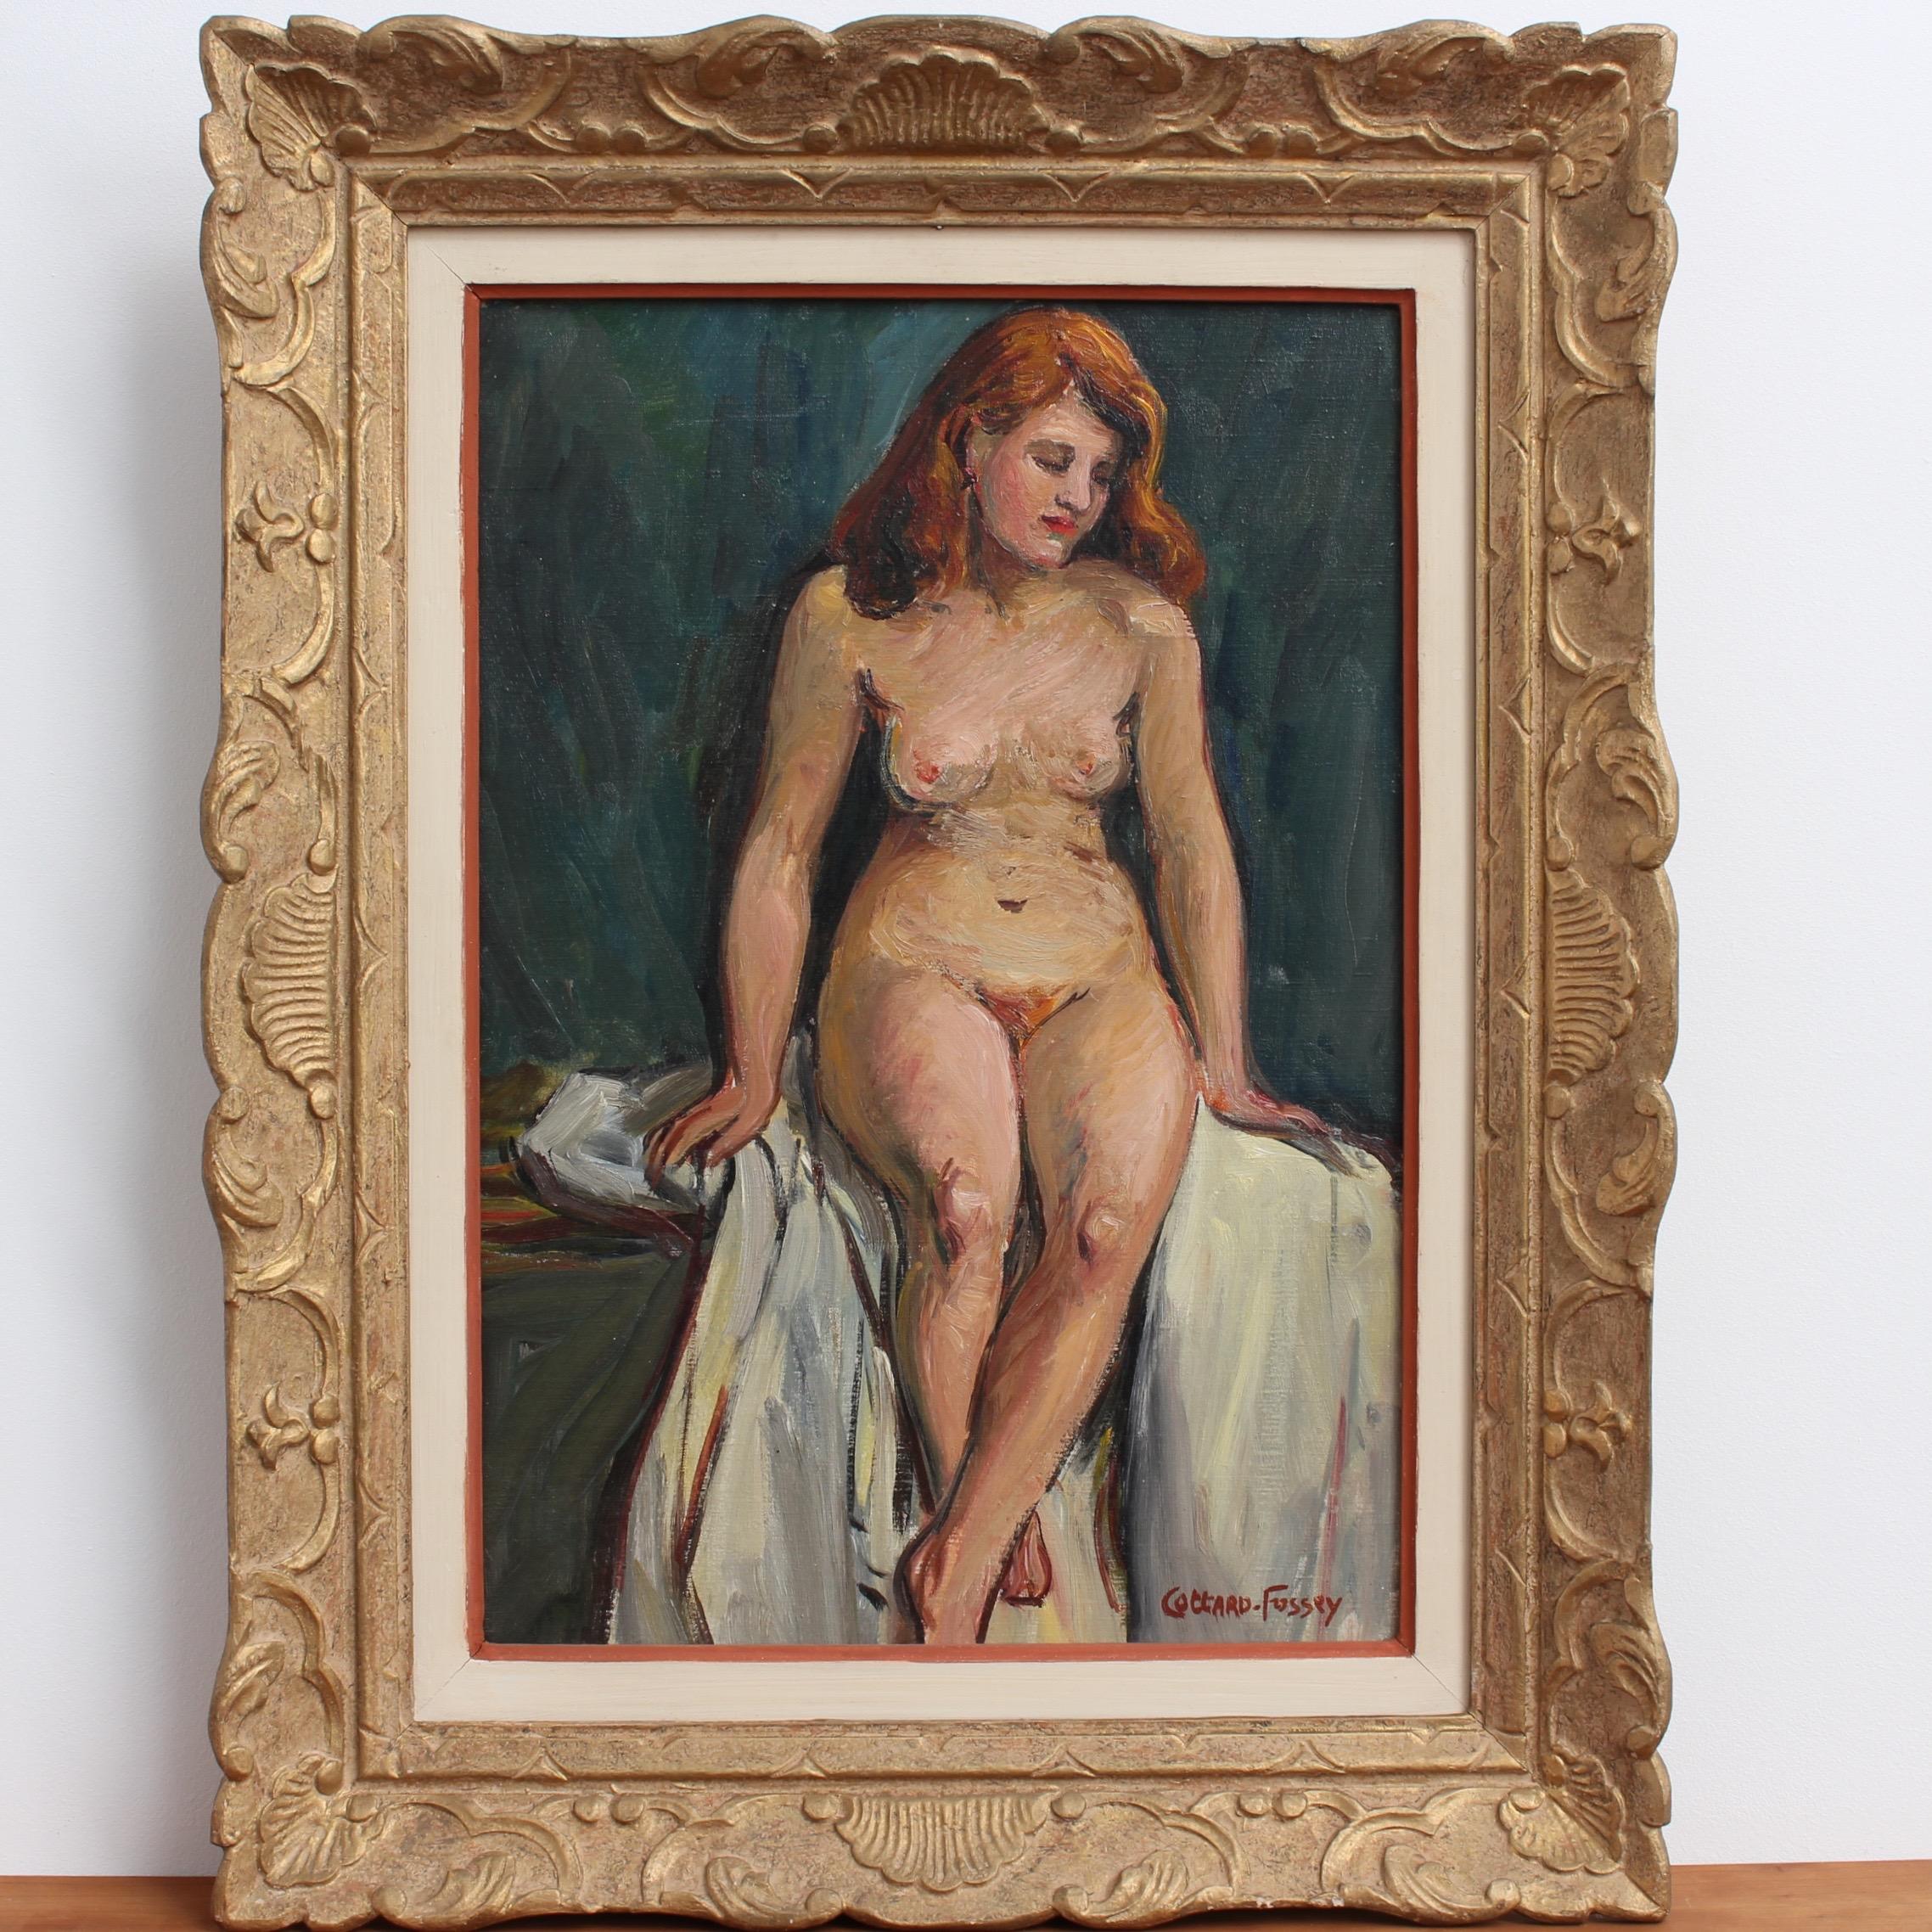 Louise Jeanne Cottard-Fossey Nude Painting - Portrait of Nude Redhead